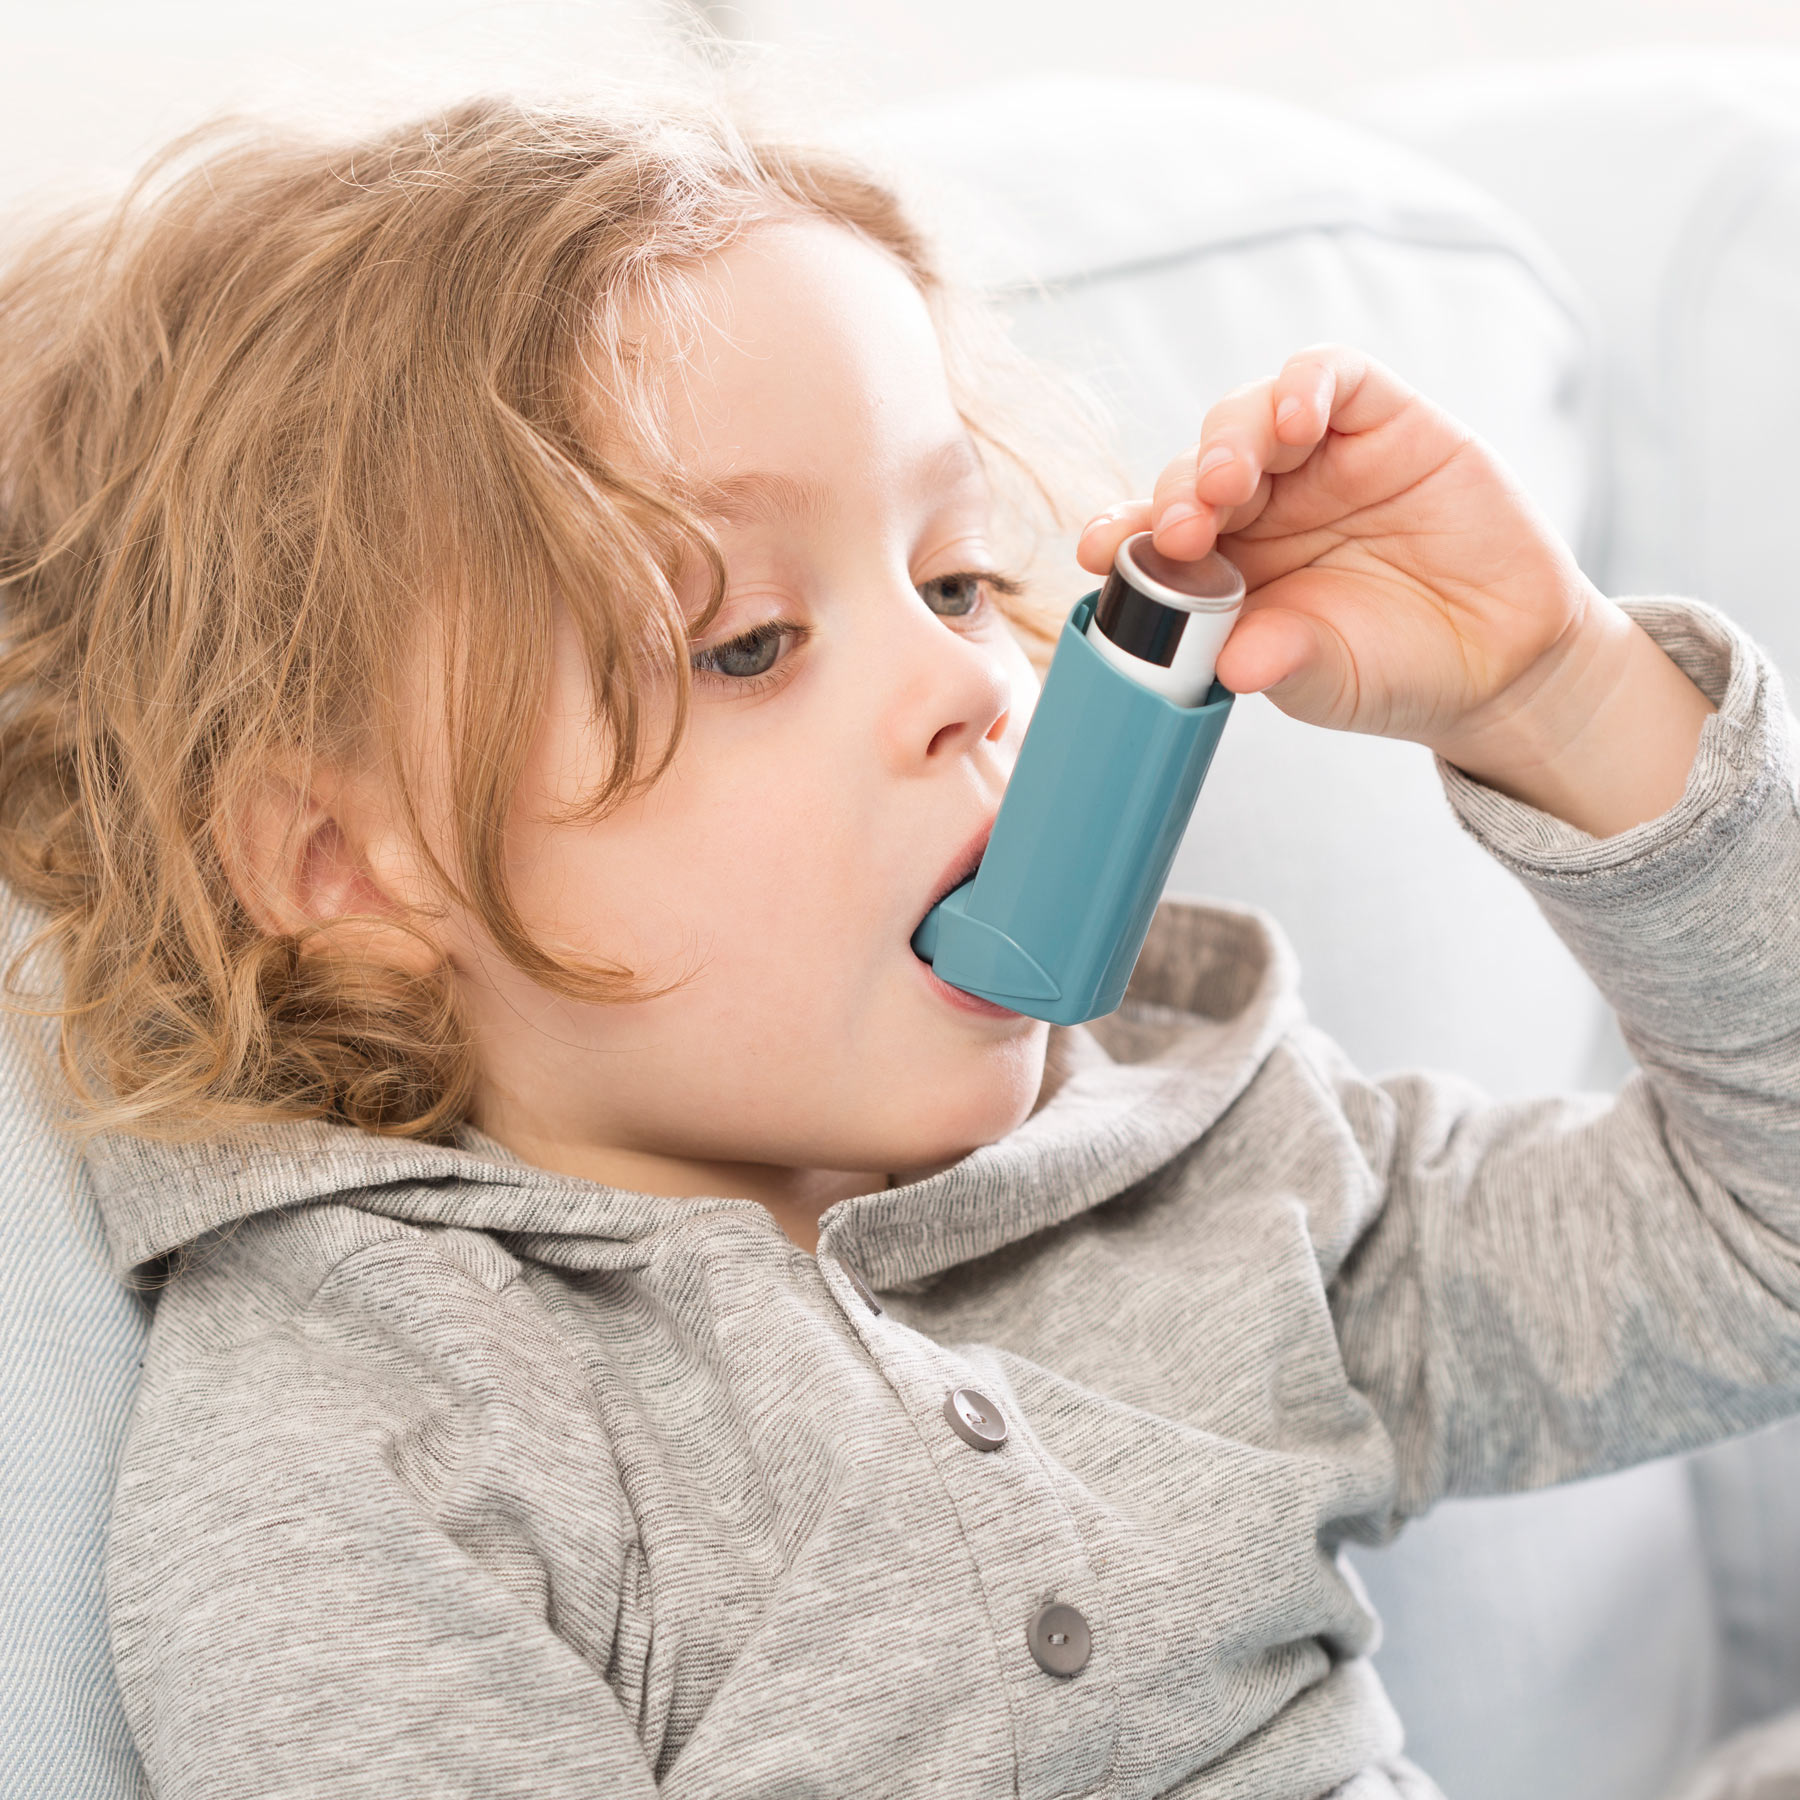 small-but-conscious-how-to-treat-asthma-PWH8JJA